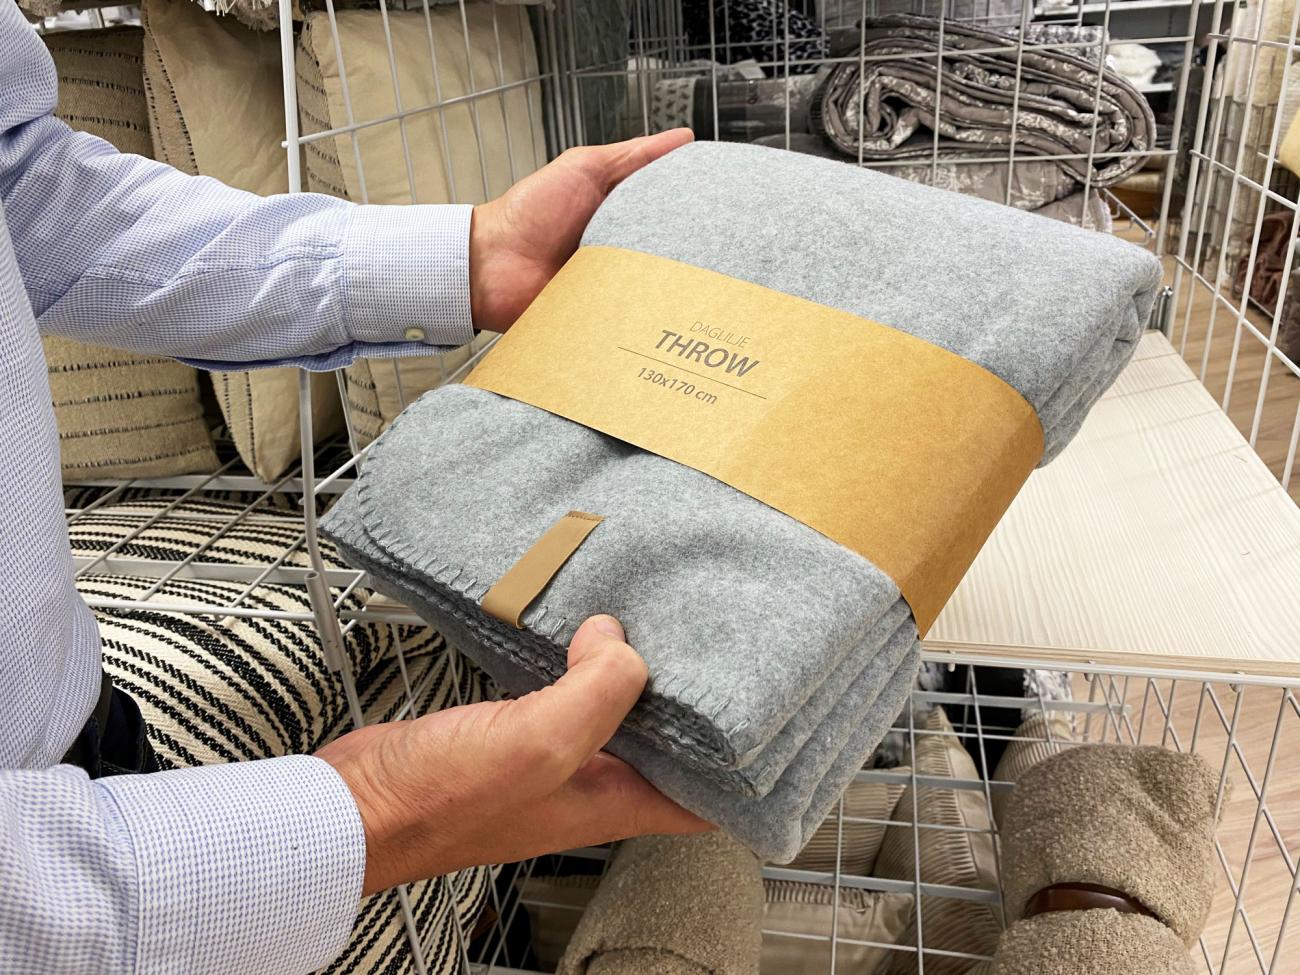 Home textiles are some of the first products to get new packaging design.